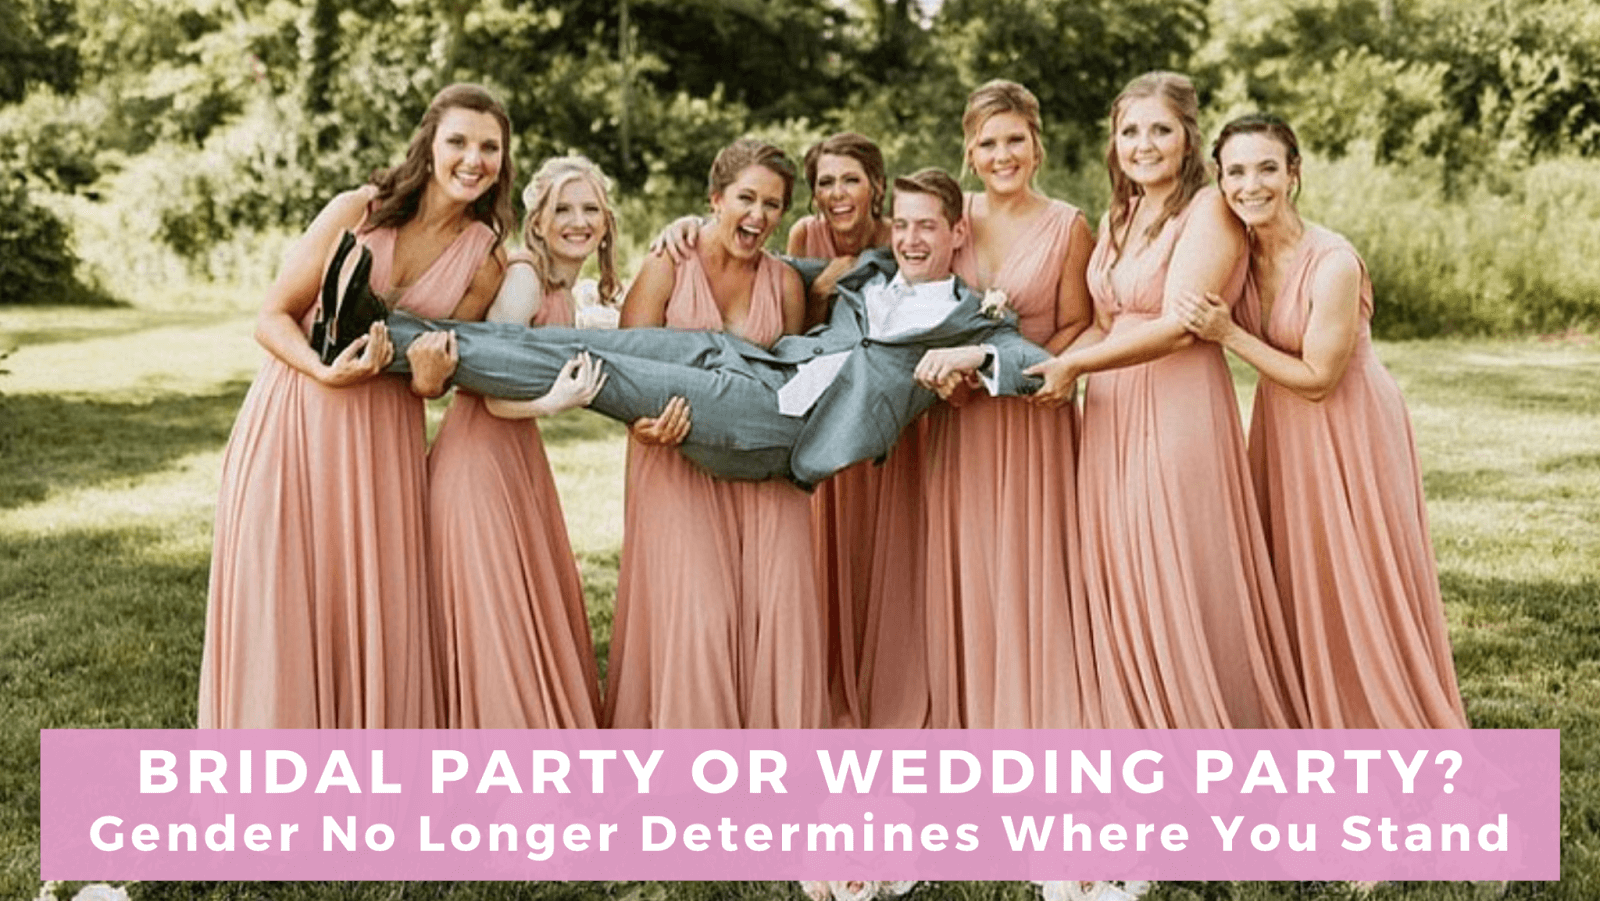 31 Fabulous Hen Party Outfit Ideas for Brides | OneFabDay.com